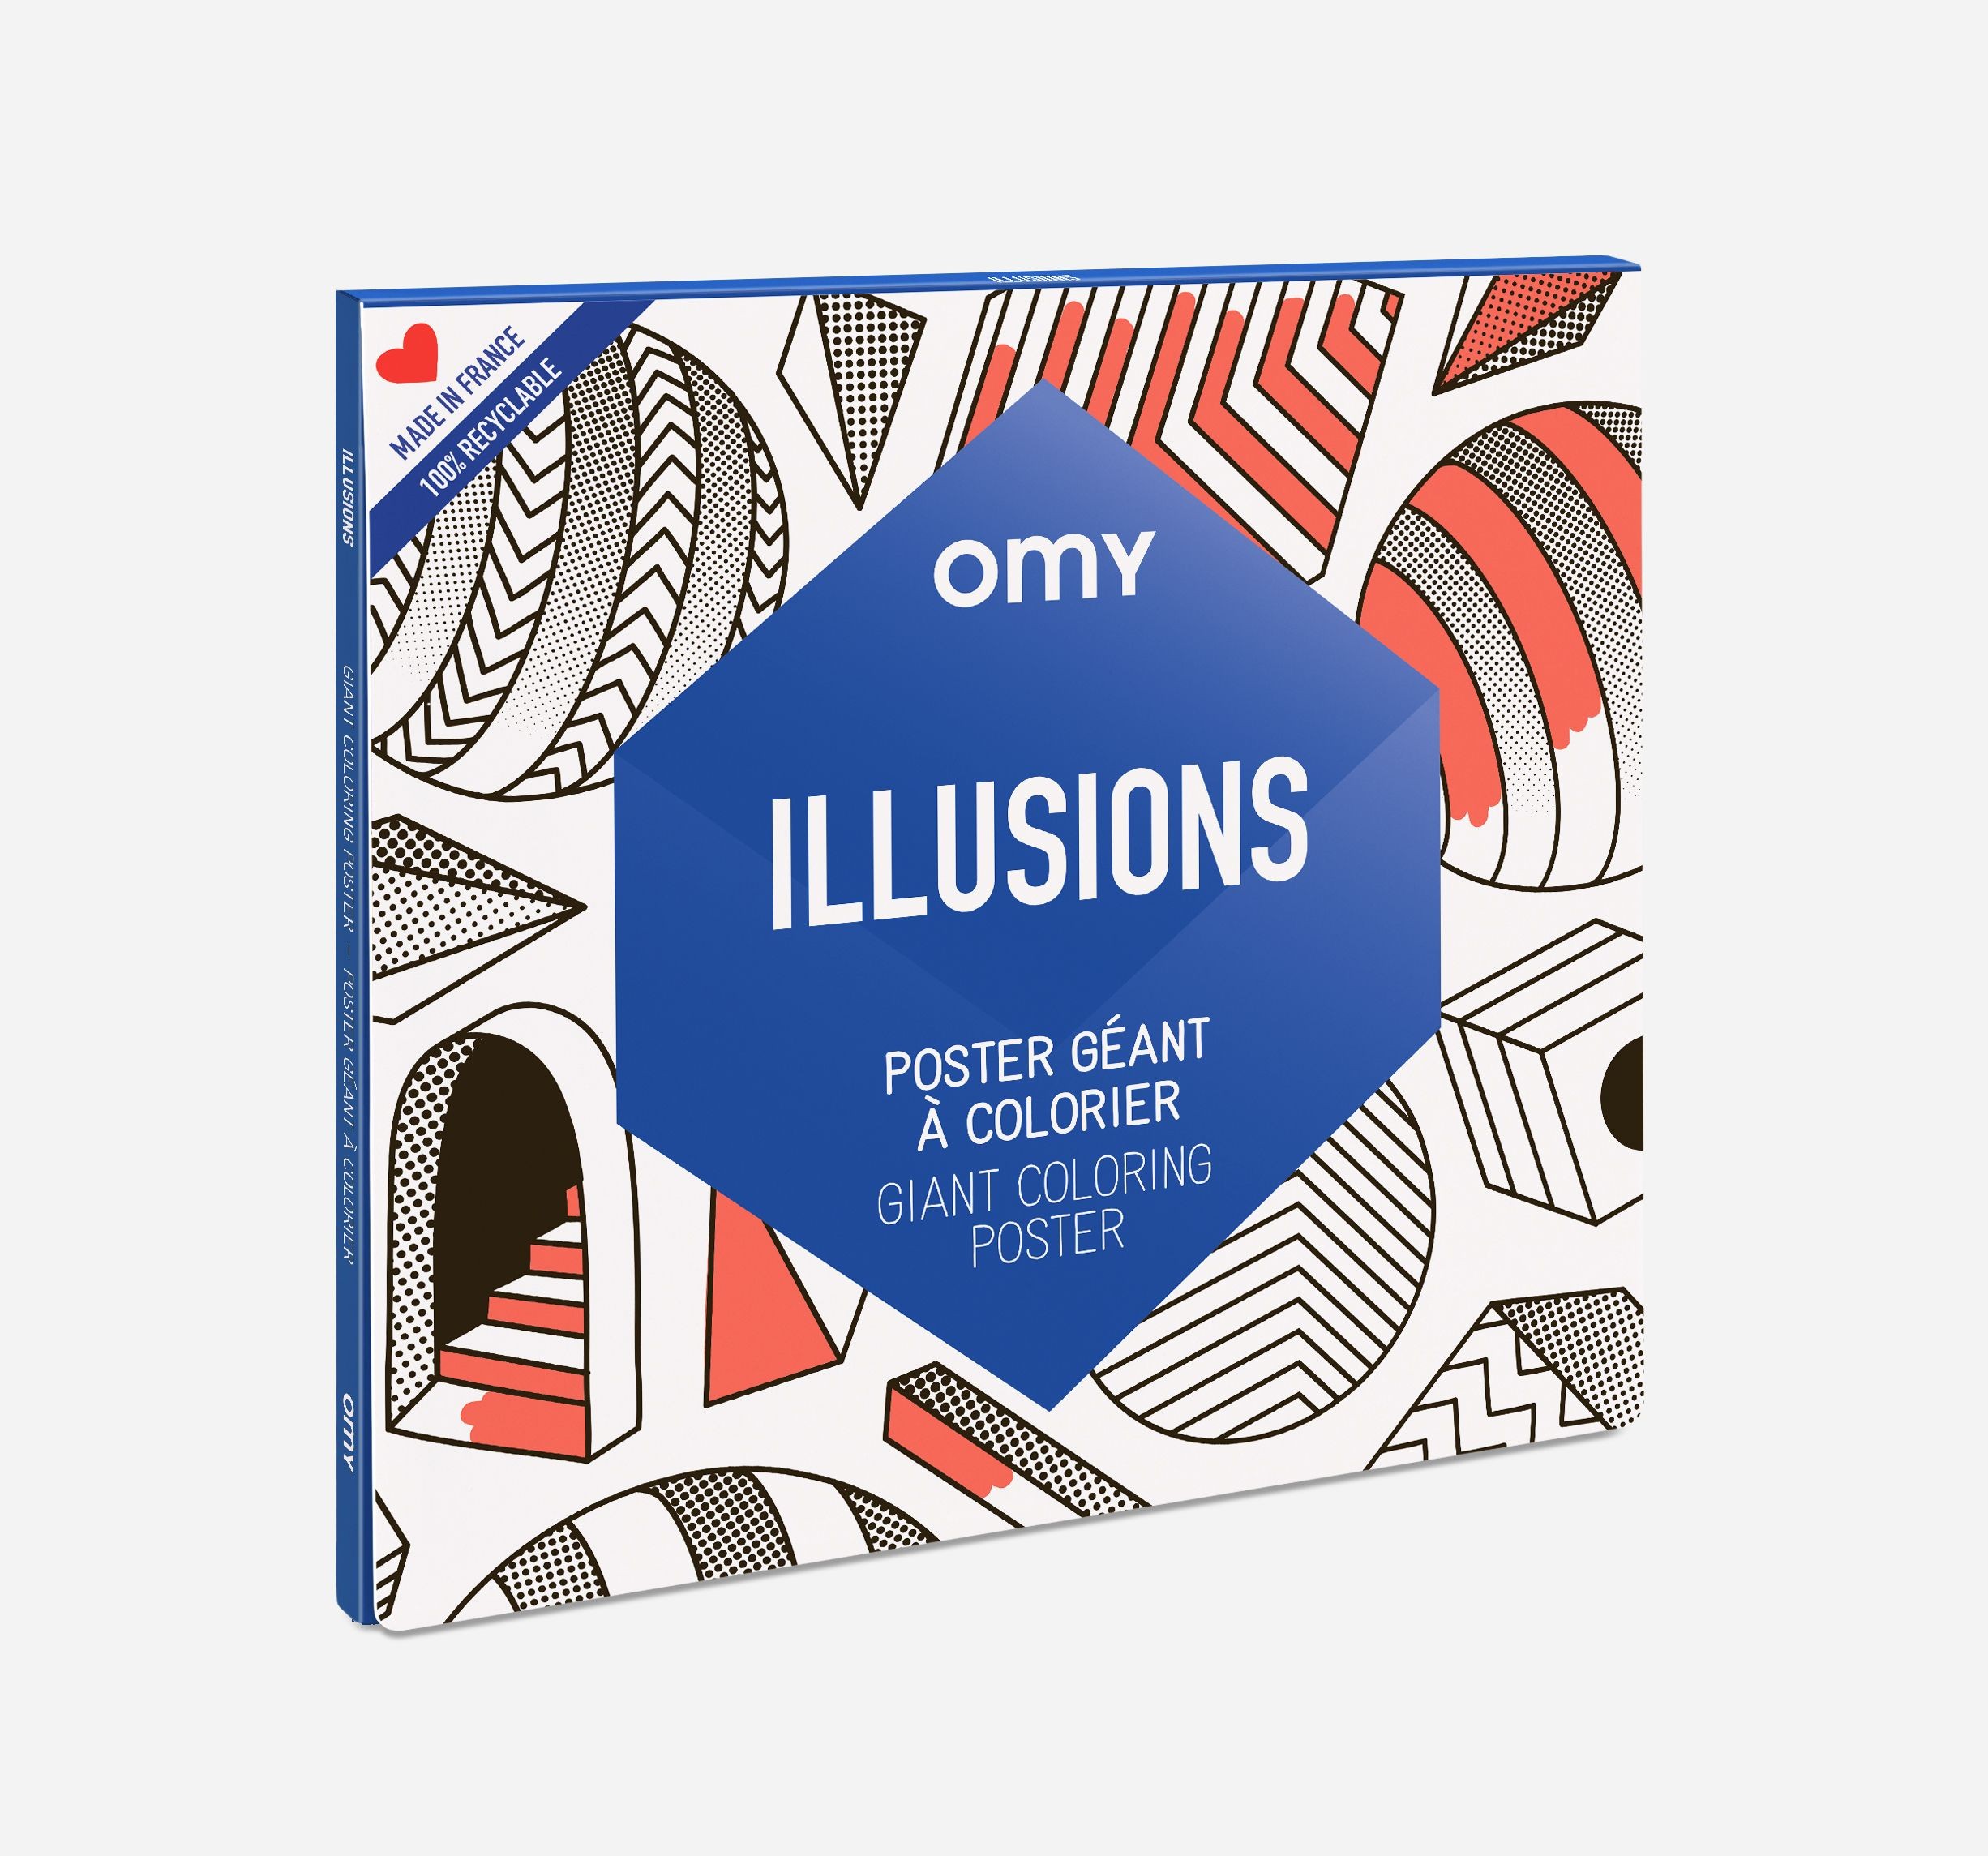 OMY Grand Poster A Colorier Illusions